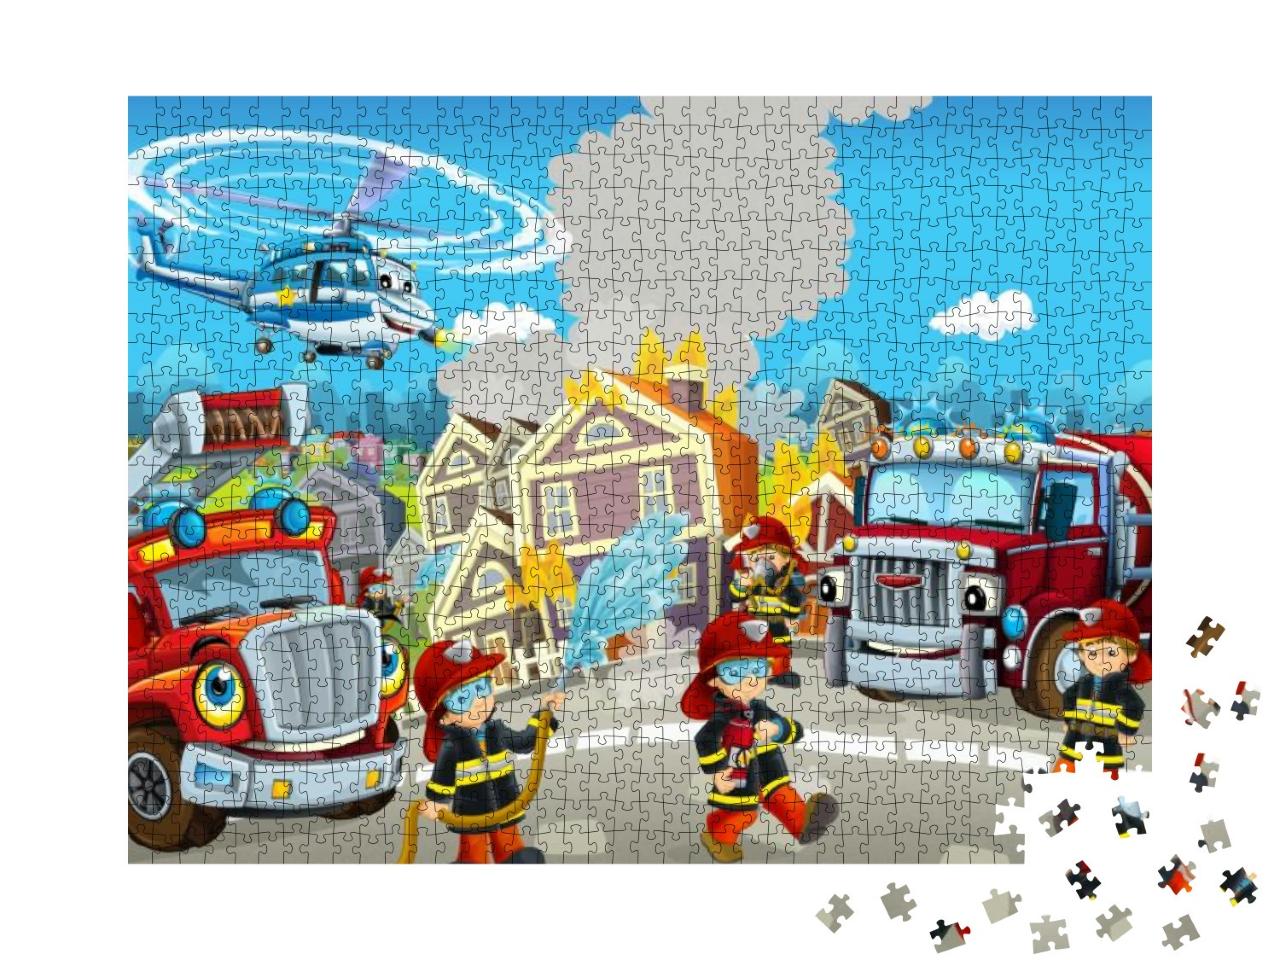 Cartoon Happy & Funny City Scene with Firemen & Different... Jigsaw Puzzle with 1000 pieces